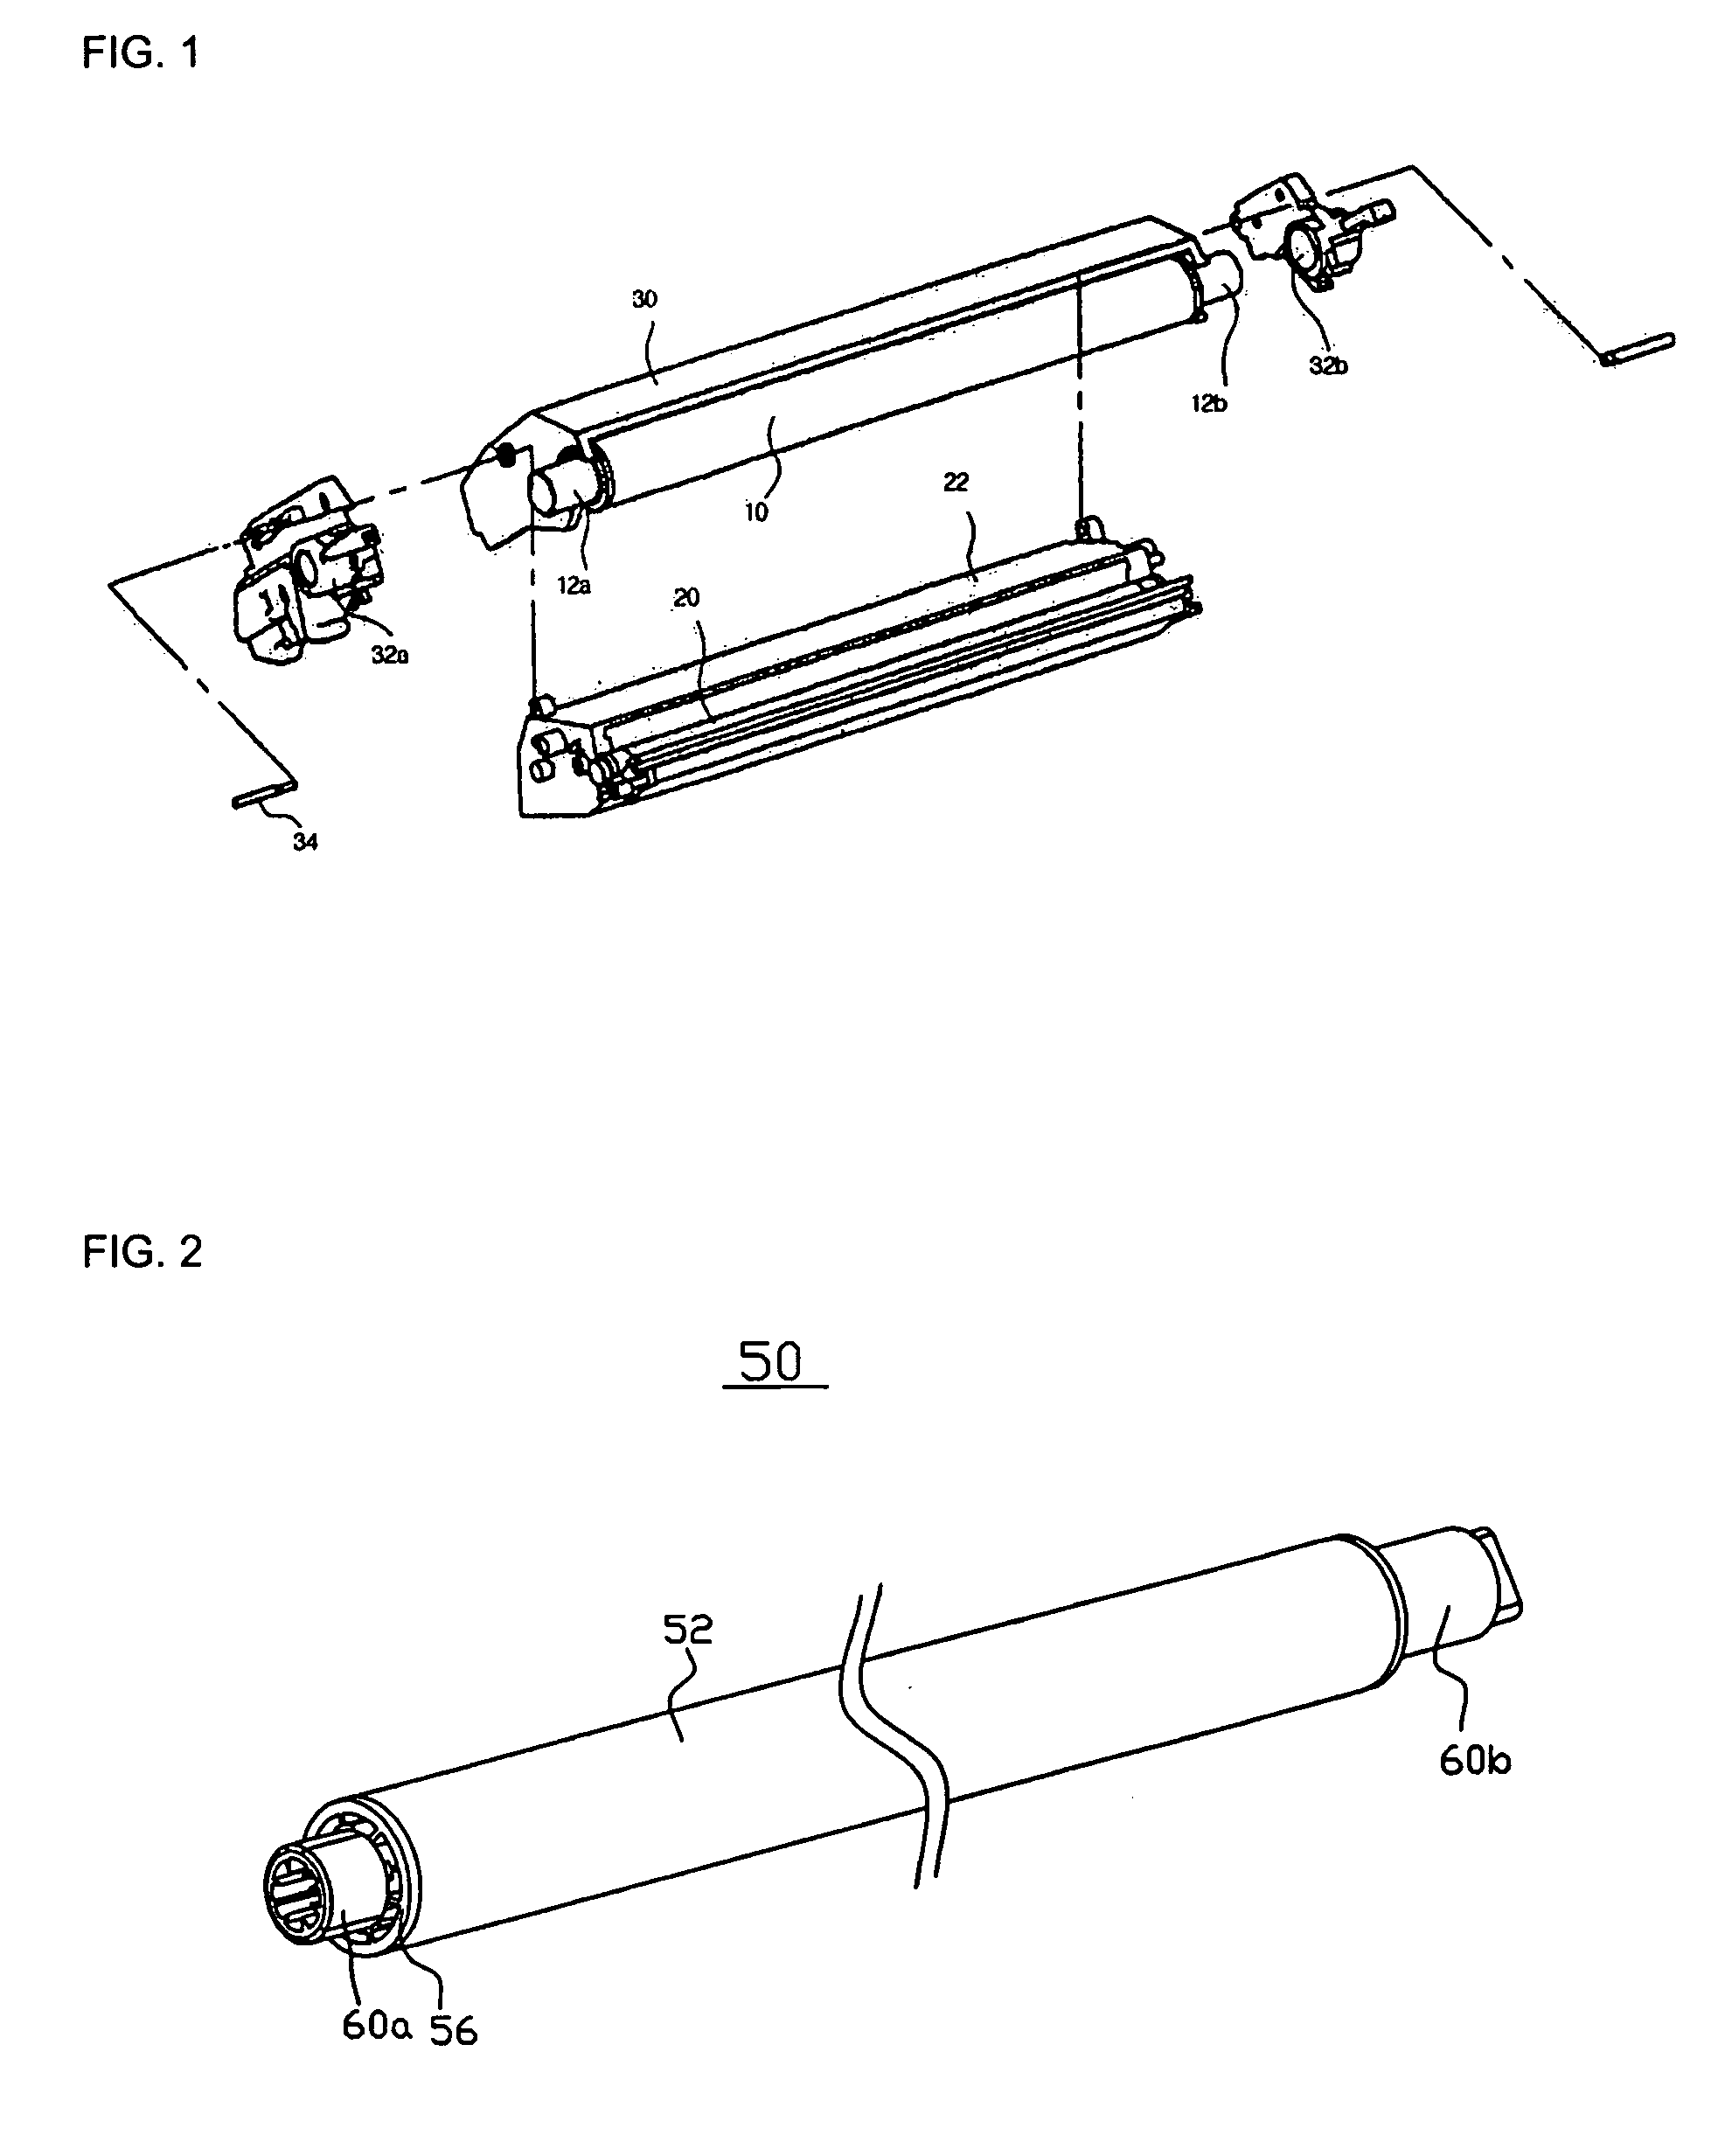 Photosensitive drum for printer cartridge and method for mounting the same